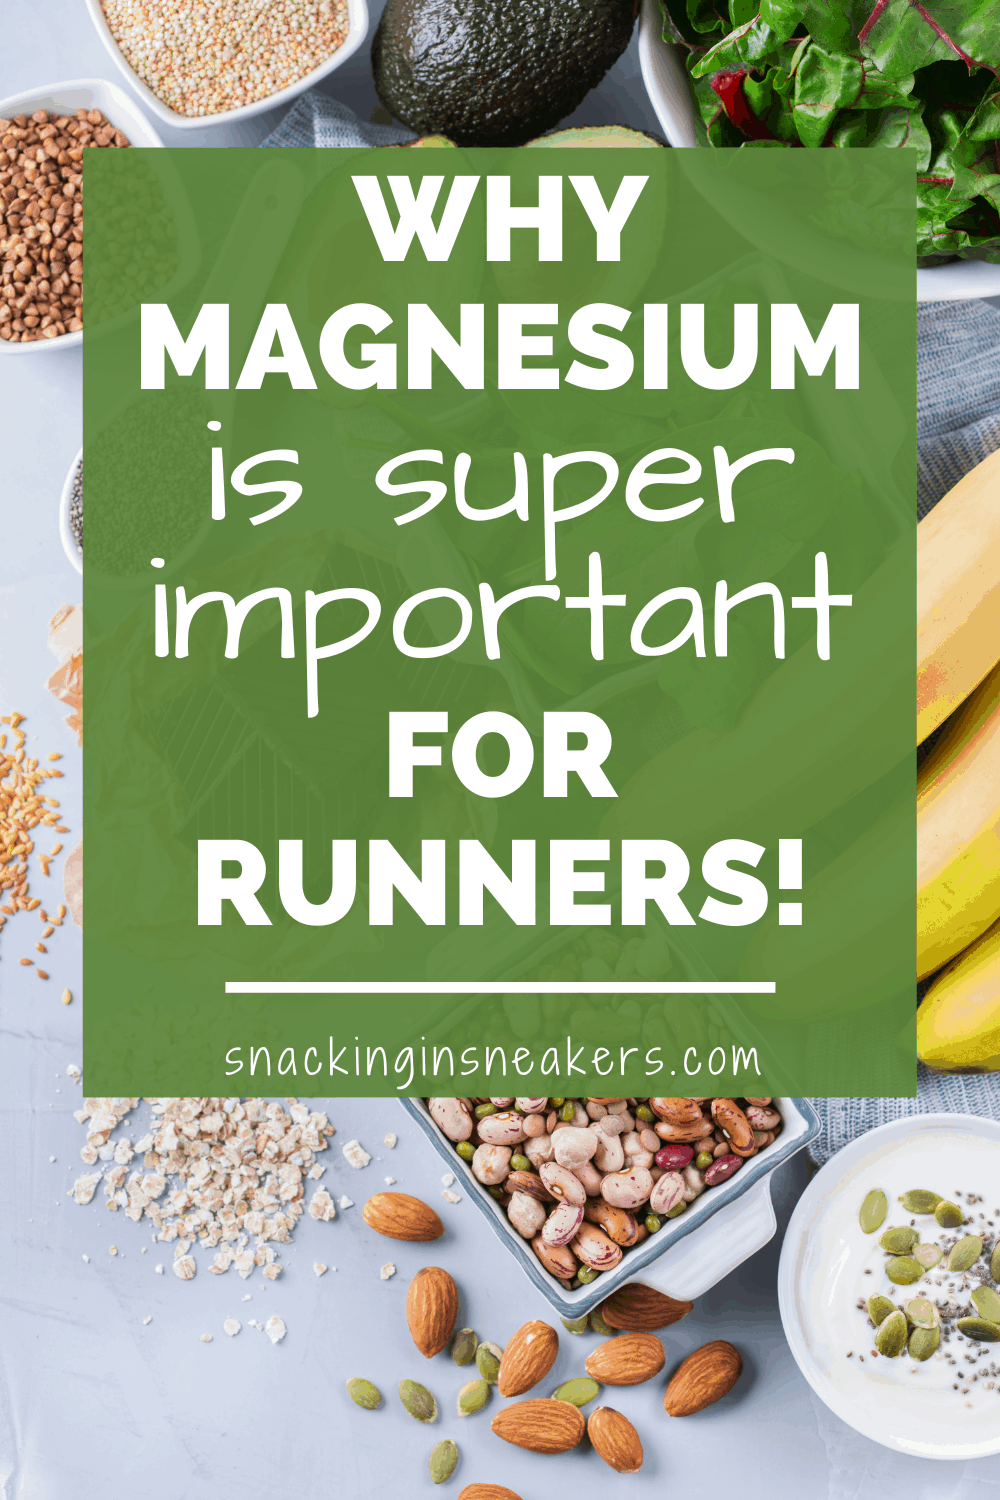 Nuts, seeds, bananas, avocado, and spinach on a table, with a text overlay that says why magnesium is important for runners.